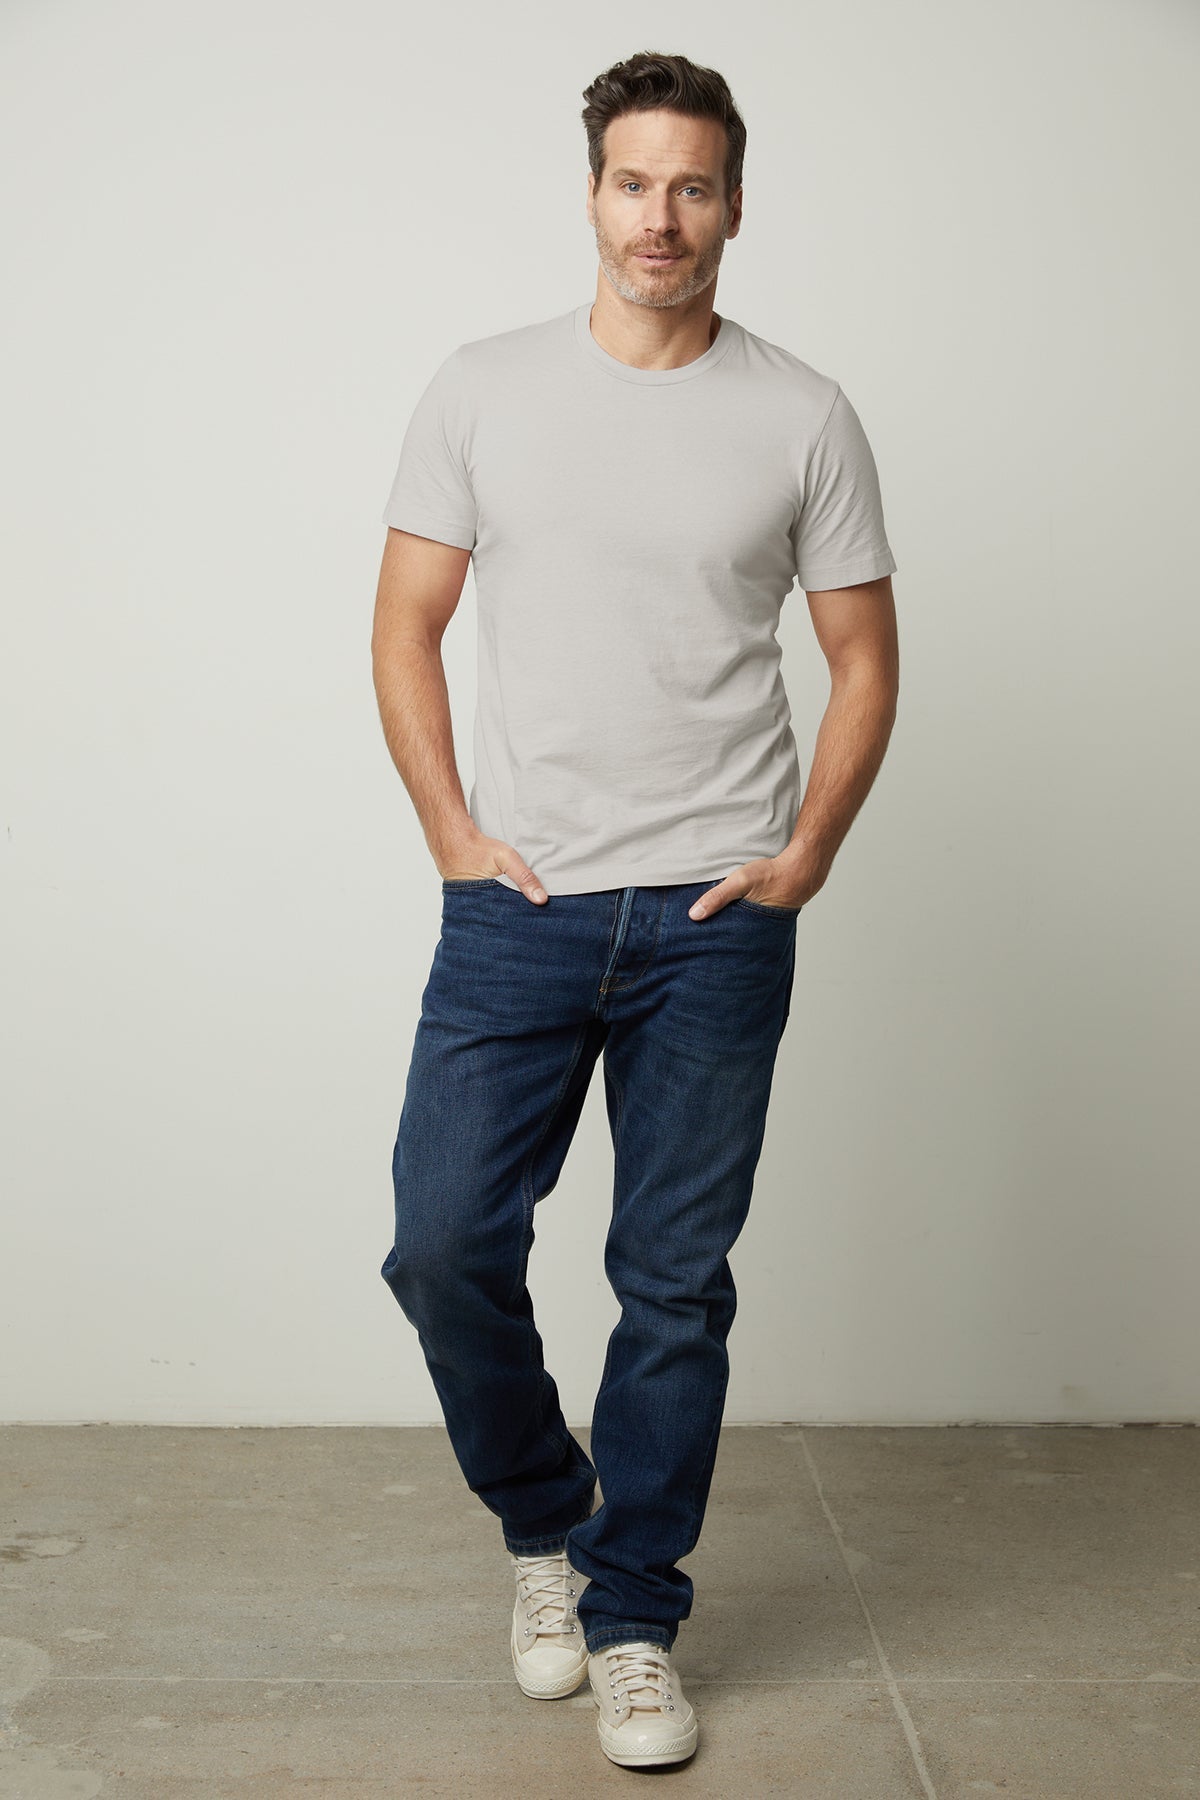   howard whisper classic crew neck tee in cement crew neck tee in cement front view with denim 